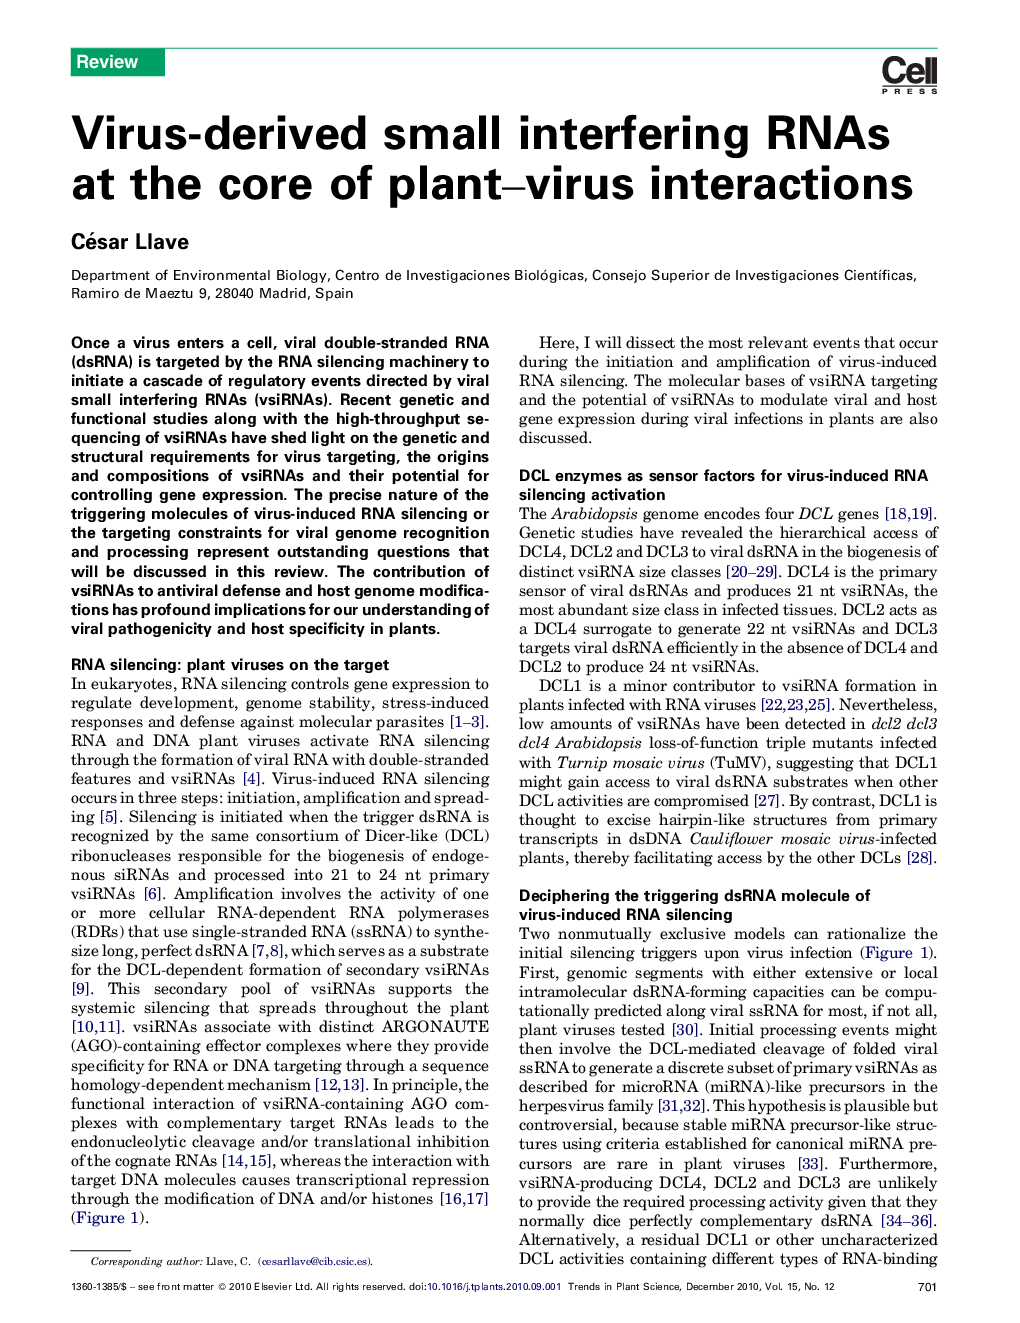 Virus-derived small interfering RNAs at the core of plant–virus interactions